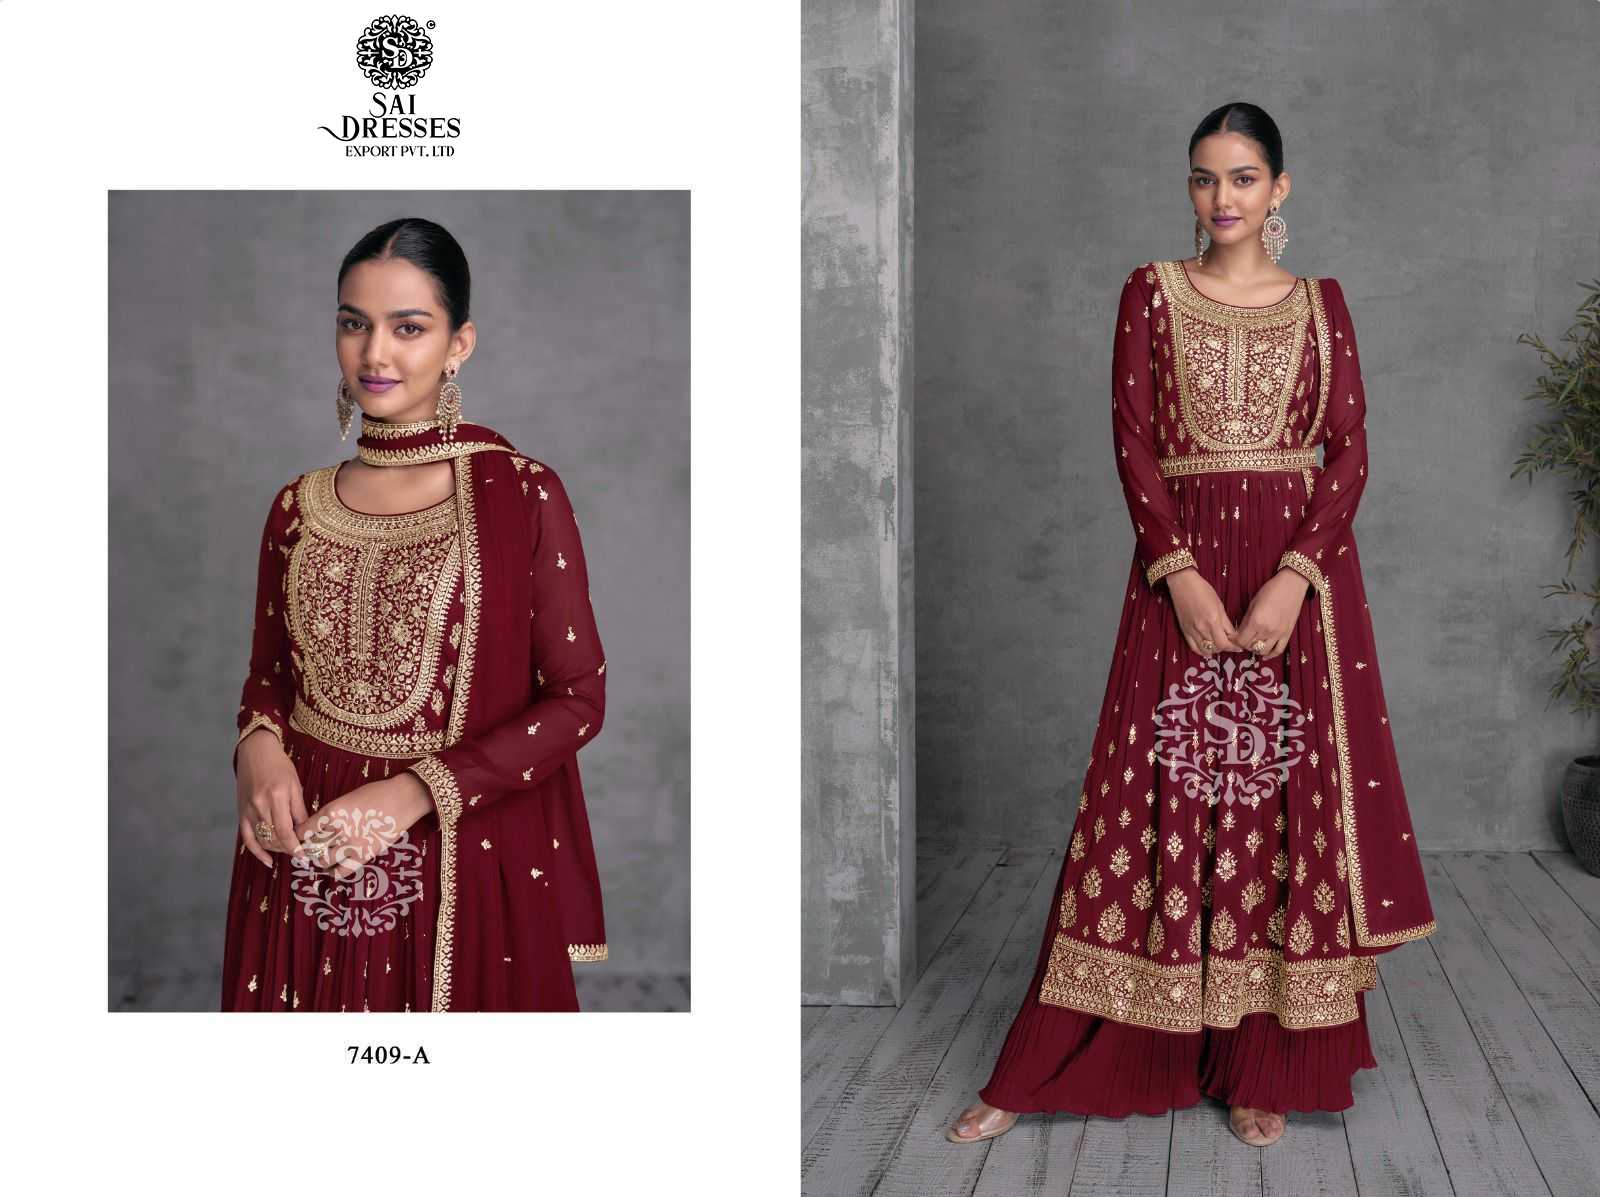 SAI DRESSES PRESENT DULARI READYMADE FESTIVE WEAR NAYRA CUT WITH PLAZZO STYLE DESIGNER SUITS IN WHOLESALE RATE IN SURAT